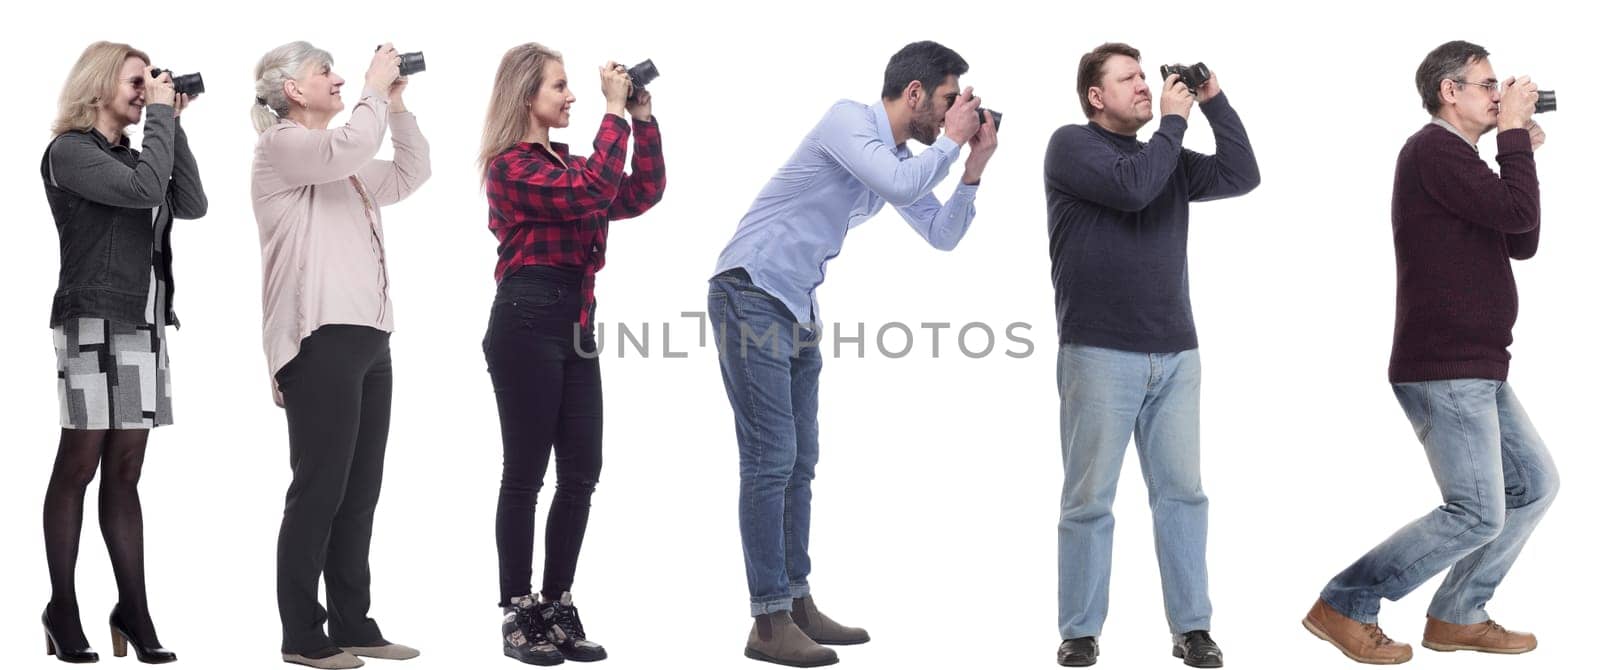 collage of group of photographers in profile isolated on white background